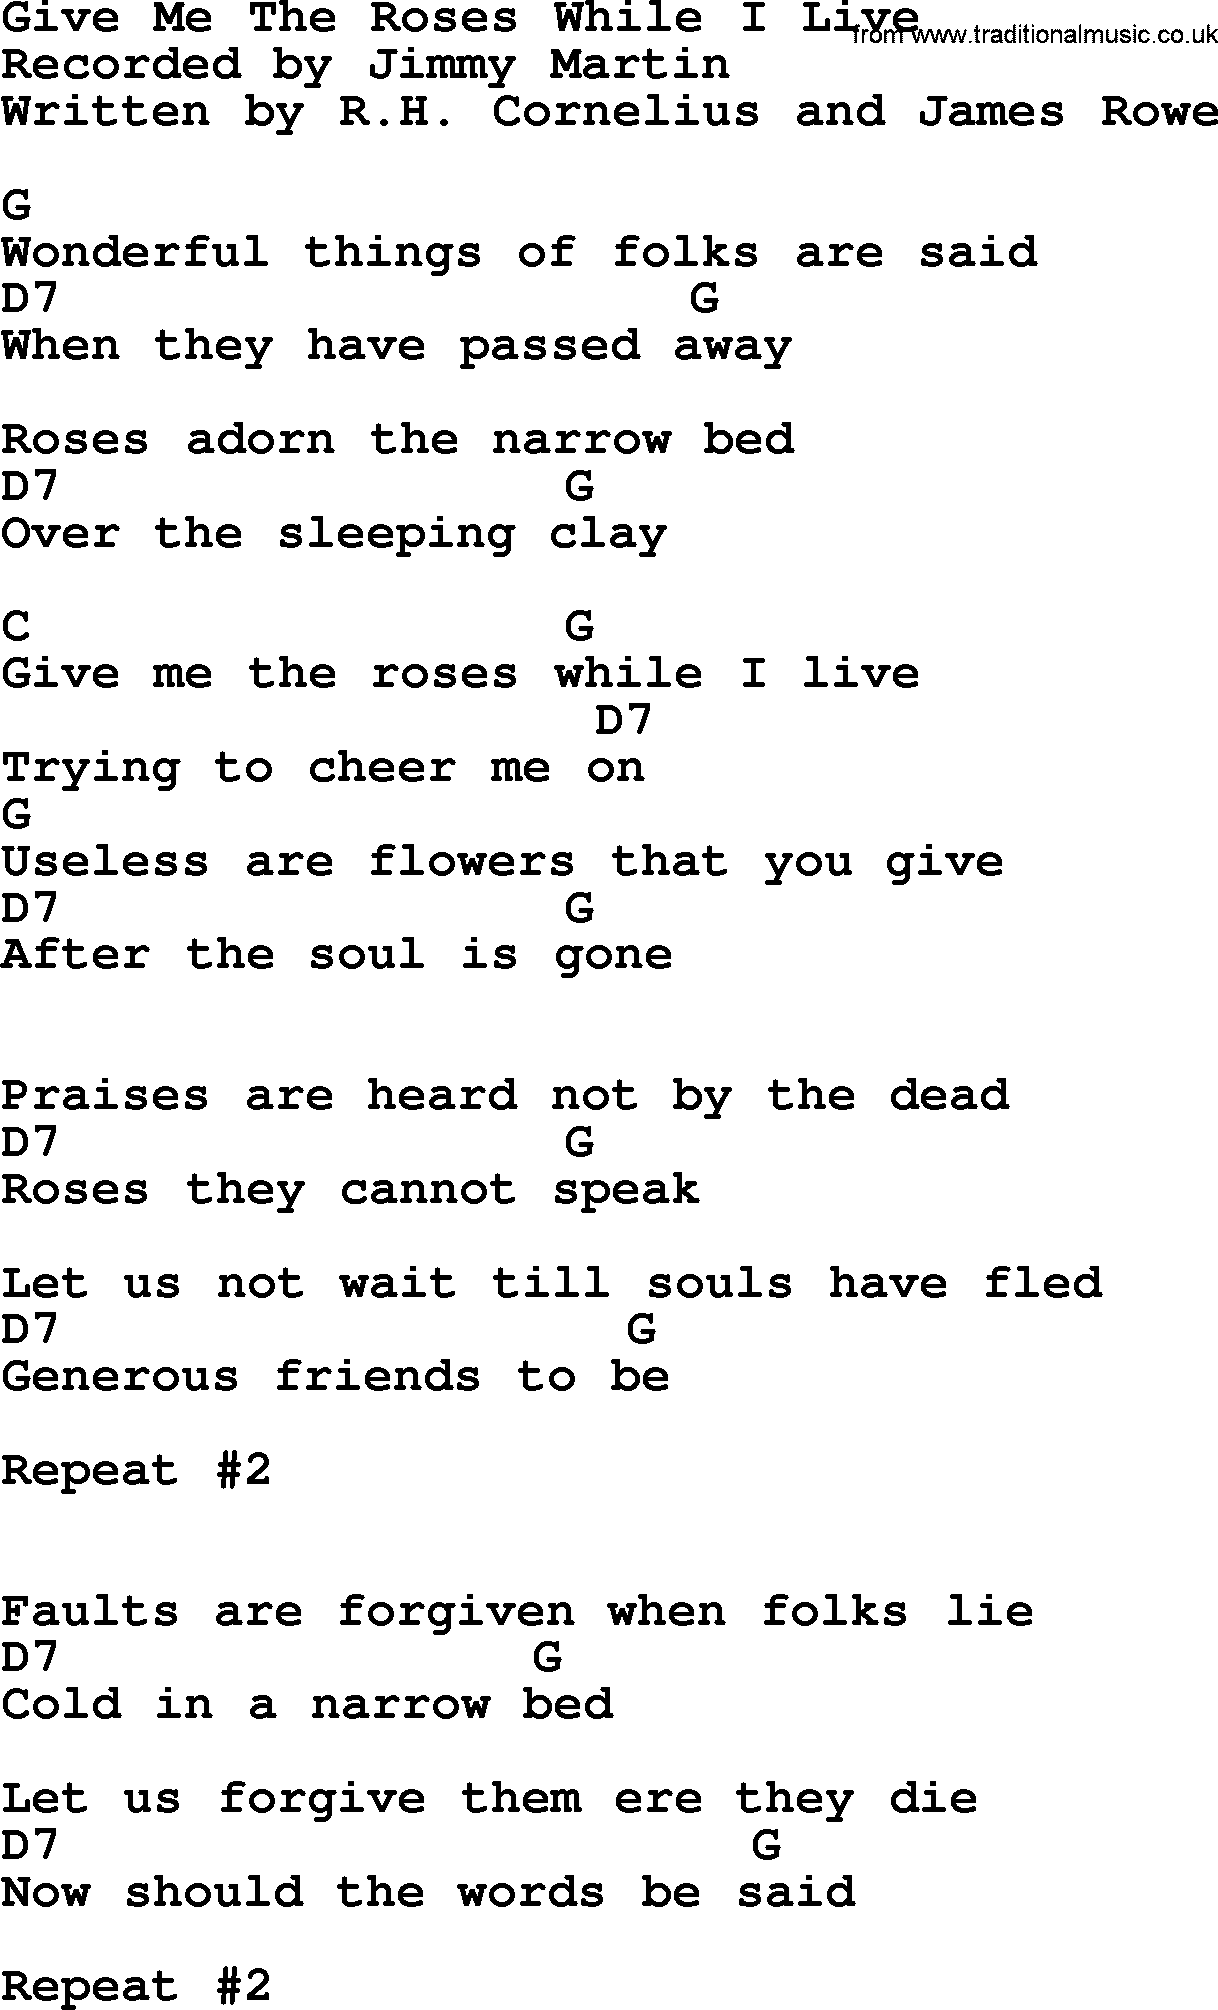 Bluegrass song: Give Me The Roses While I Live, lyrics and chords